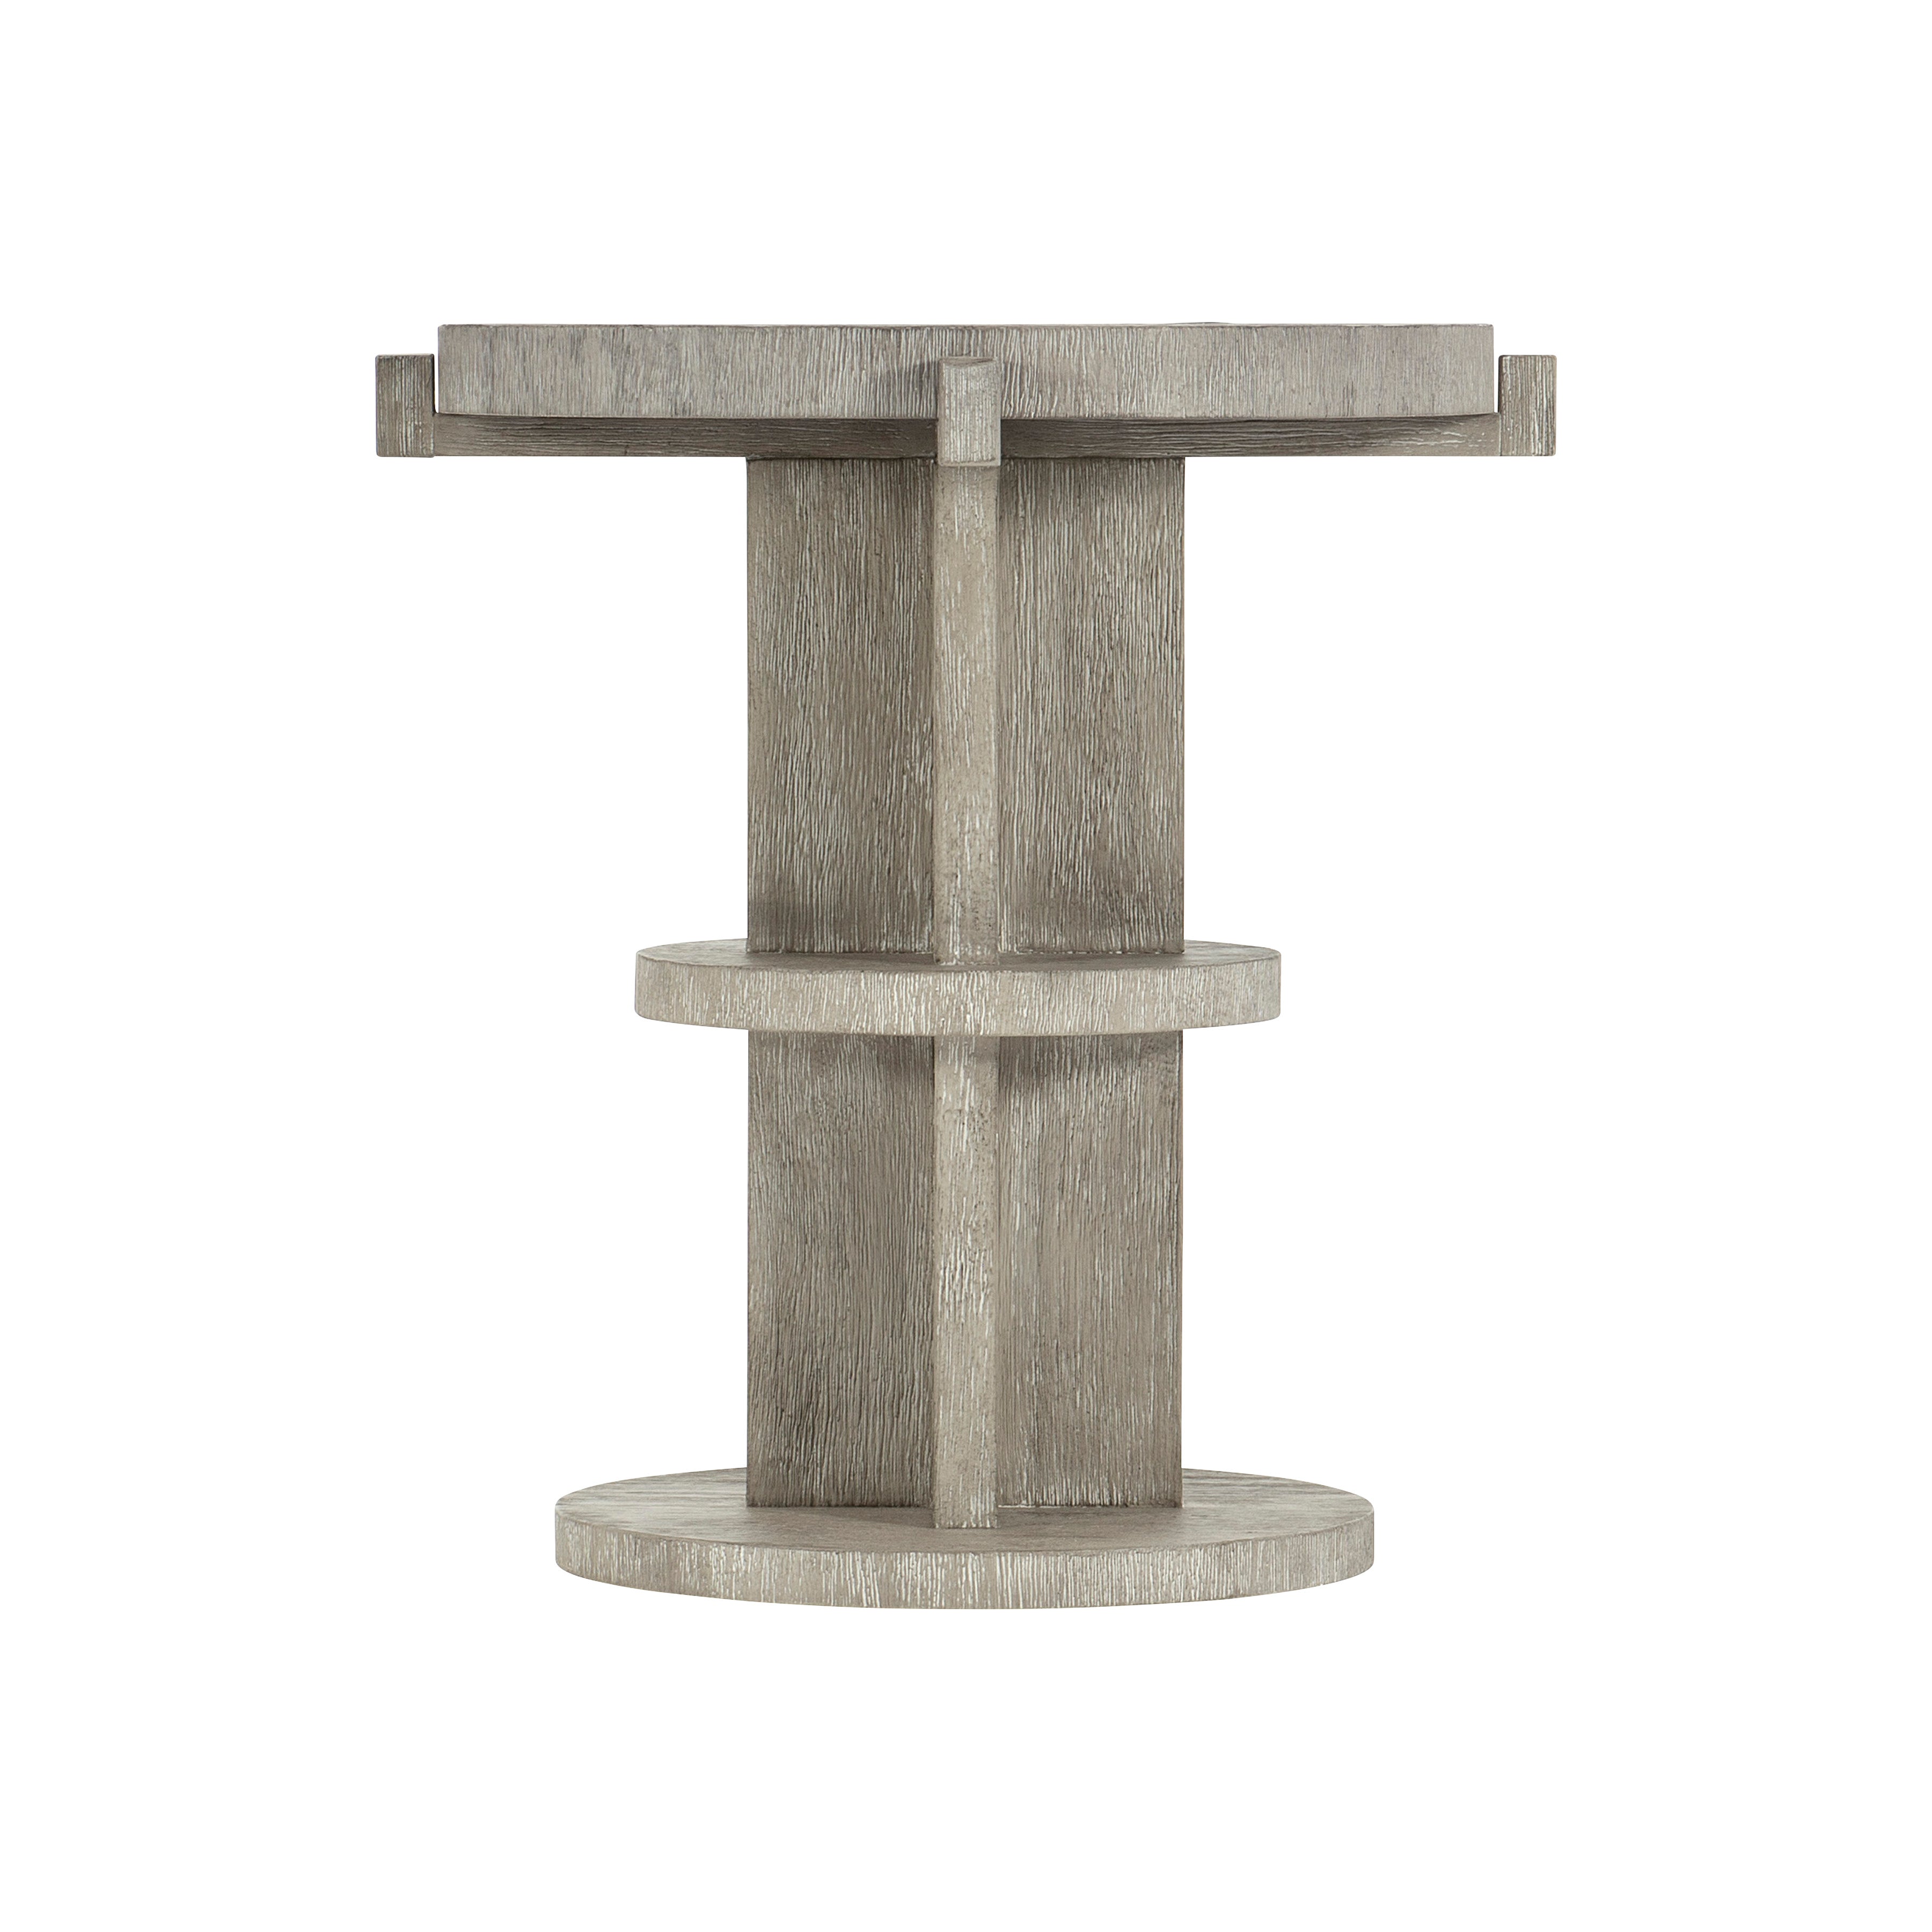 Foundations Round Side Table in Light Shale Finish